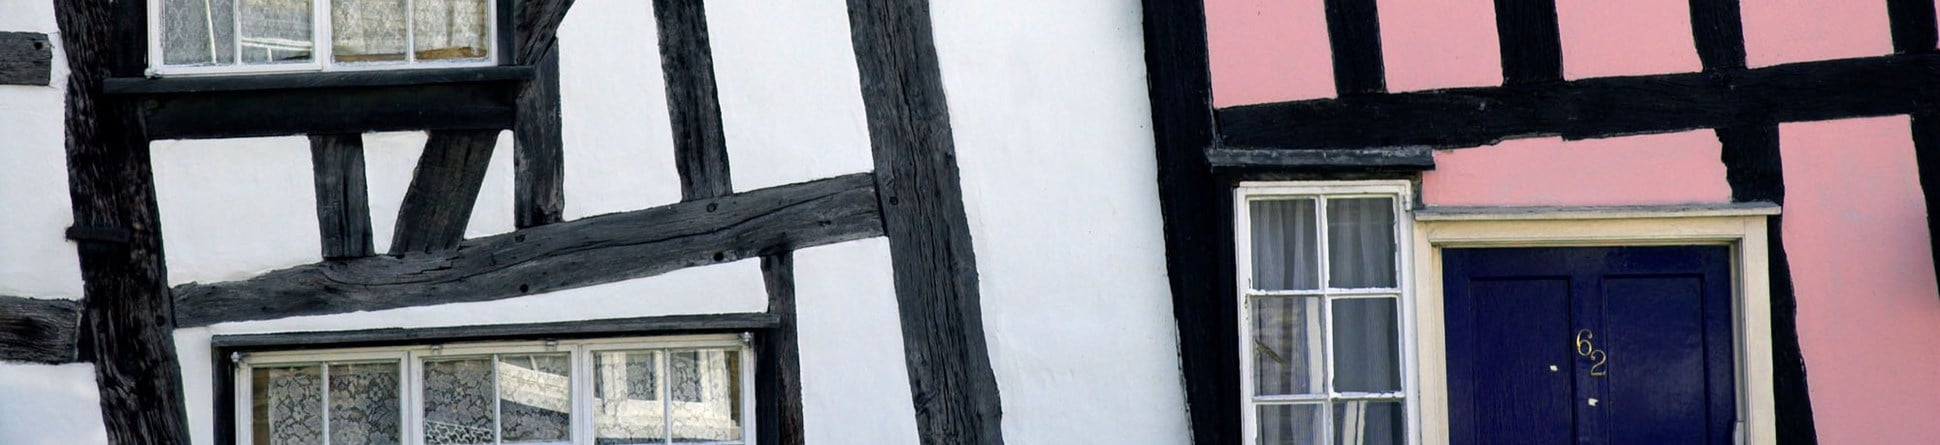 Detail of crooked timber-framed houses.